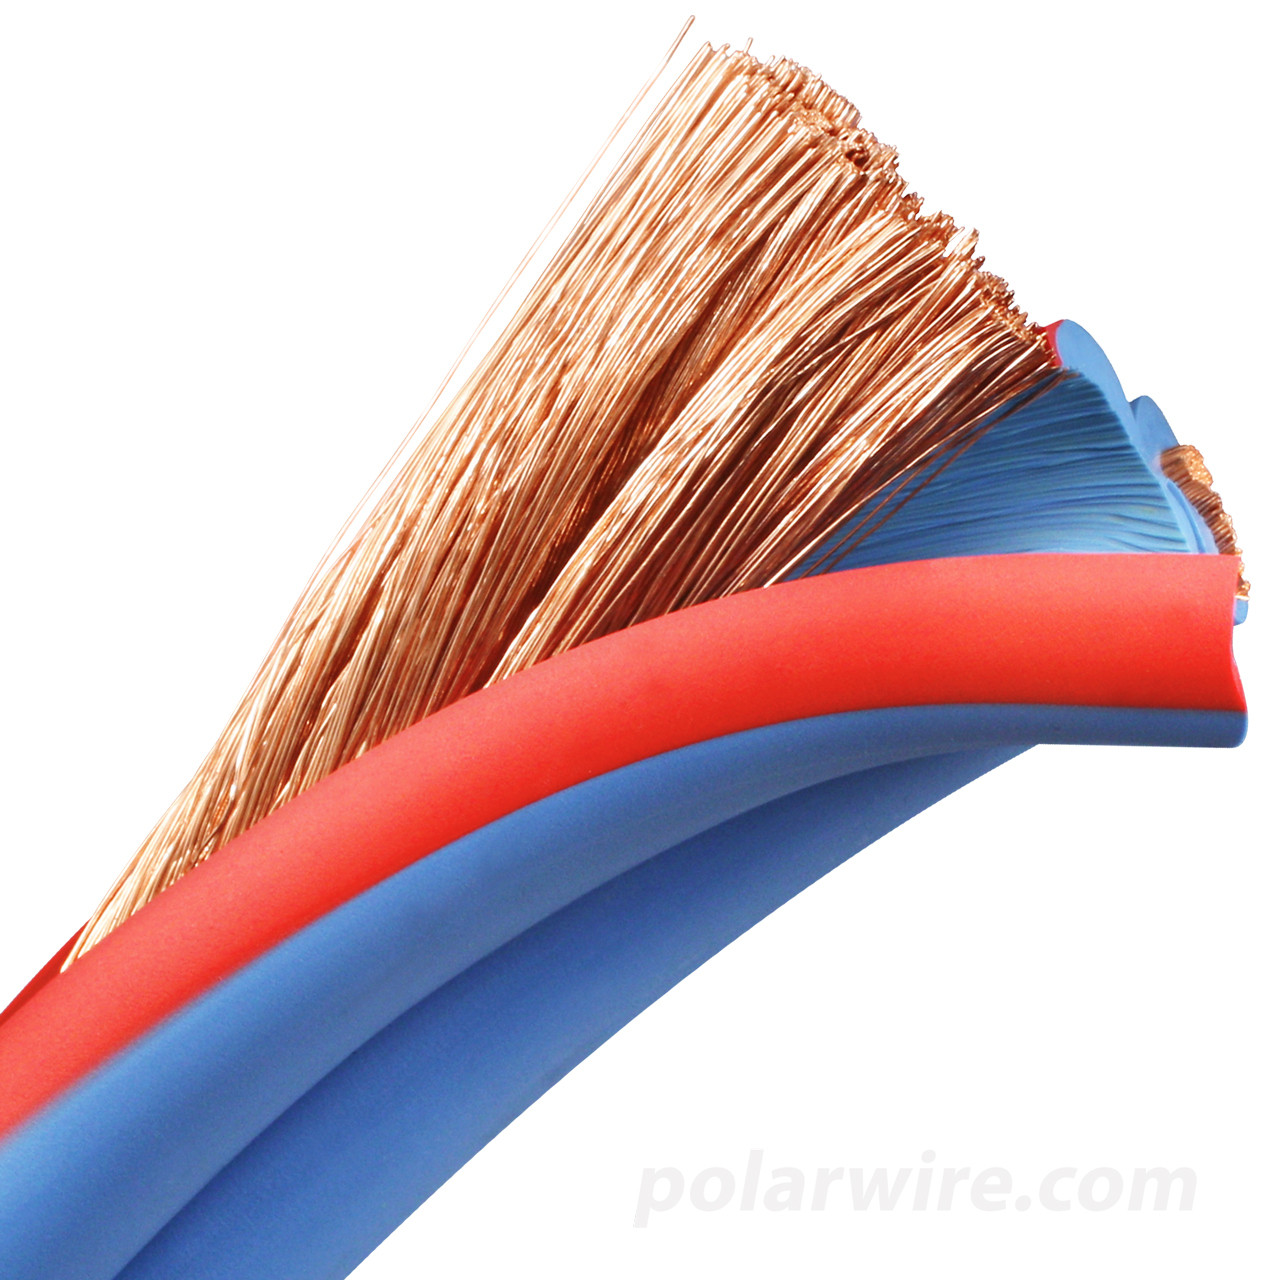 Our j1283 jumper cables are built with Arctic Superflex Blue 100% copper fine strand twin wire for flexibility and superior conductivity, even in extreme cold weather